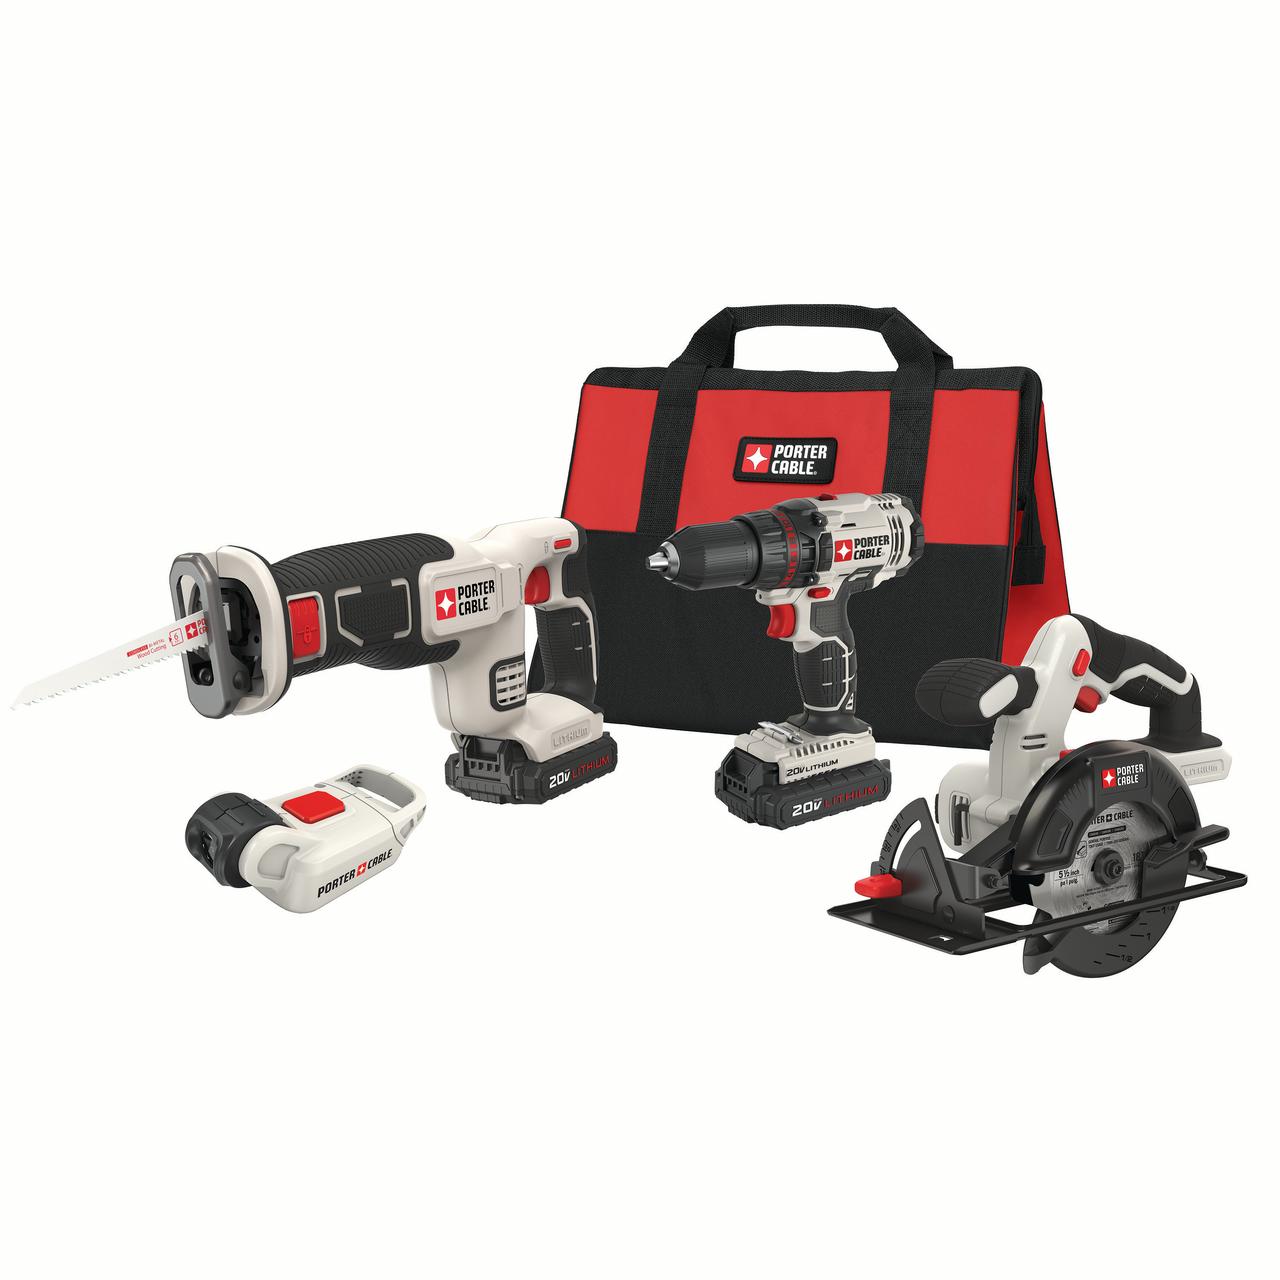 PORTER CABLE 20-Volt Max Lithium-Ion 4 Tool Combo Kit, PCCK616L4 - image 1 of 7